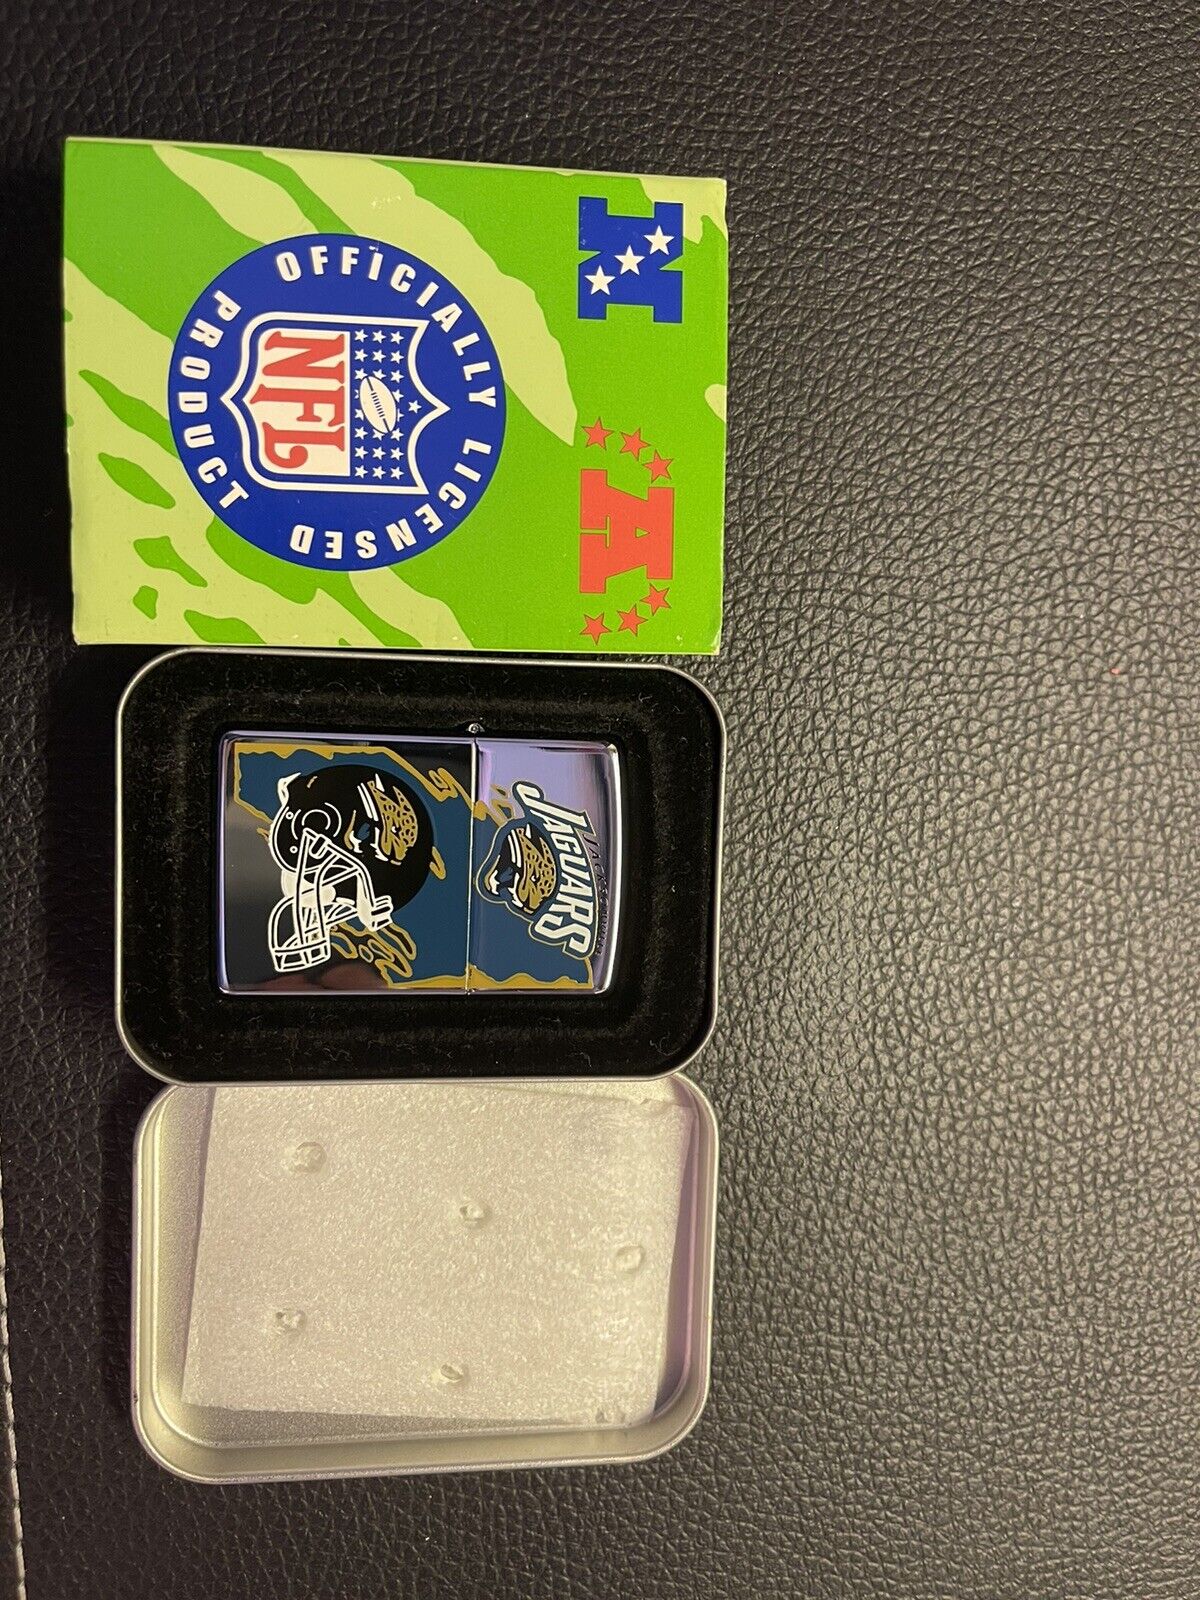 250nfl Jaguars Zippo Lighter Preowned But Never Used